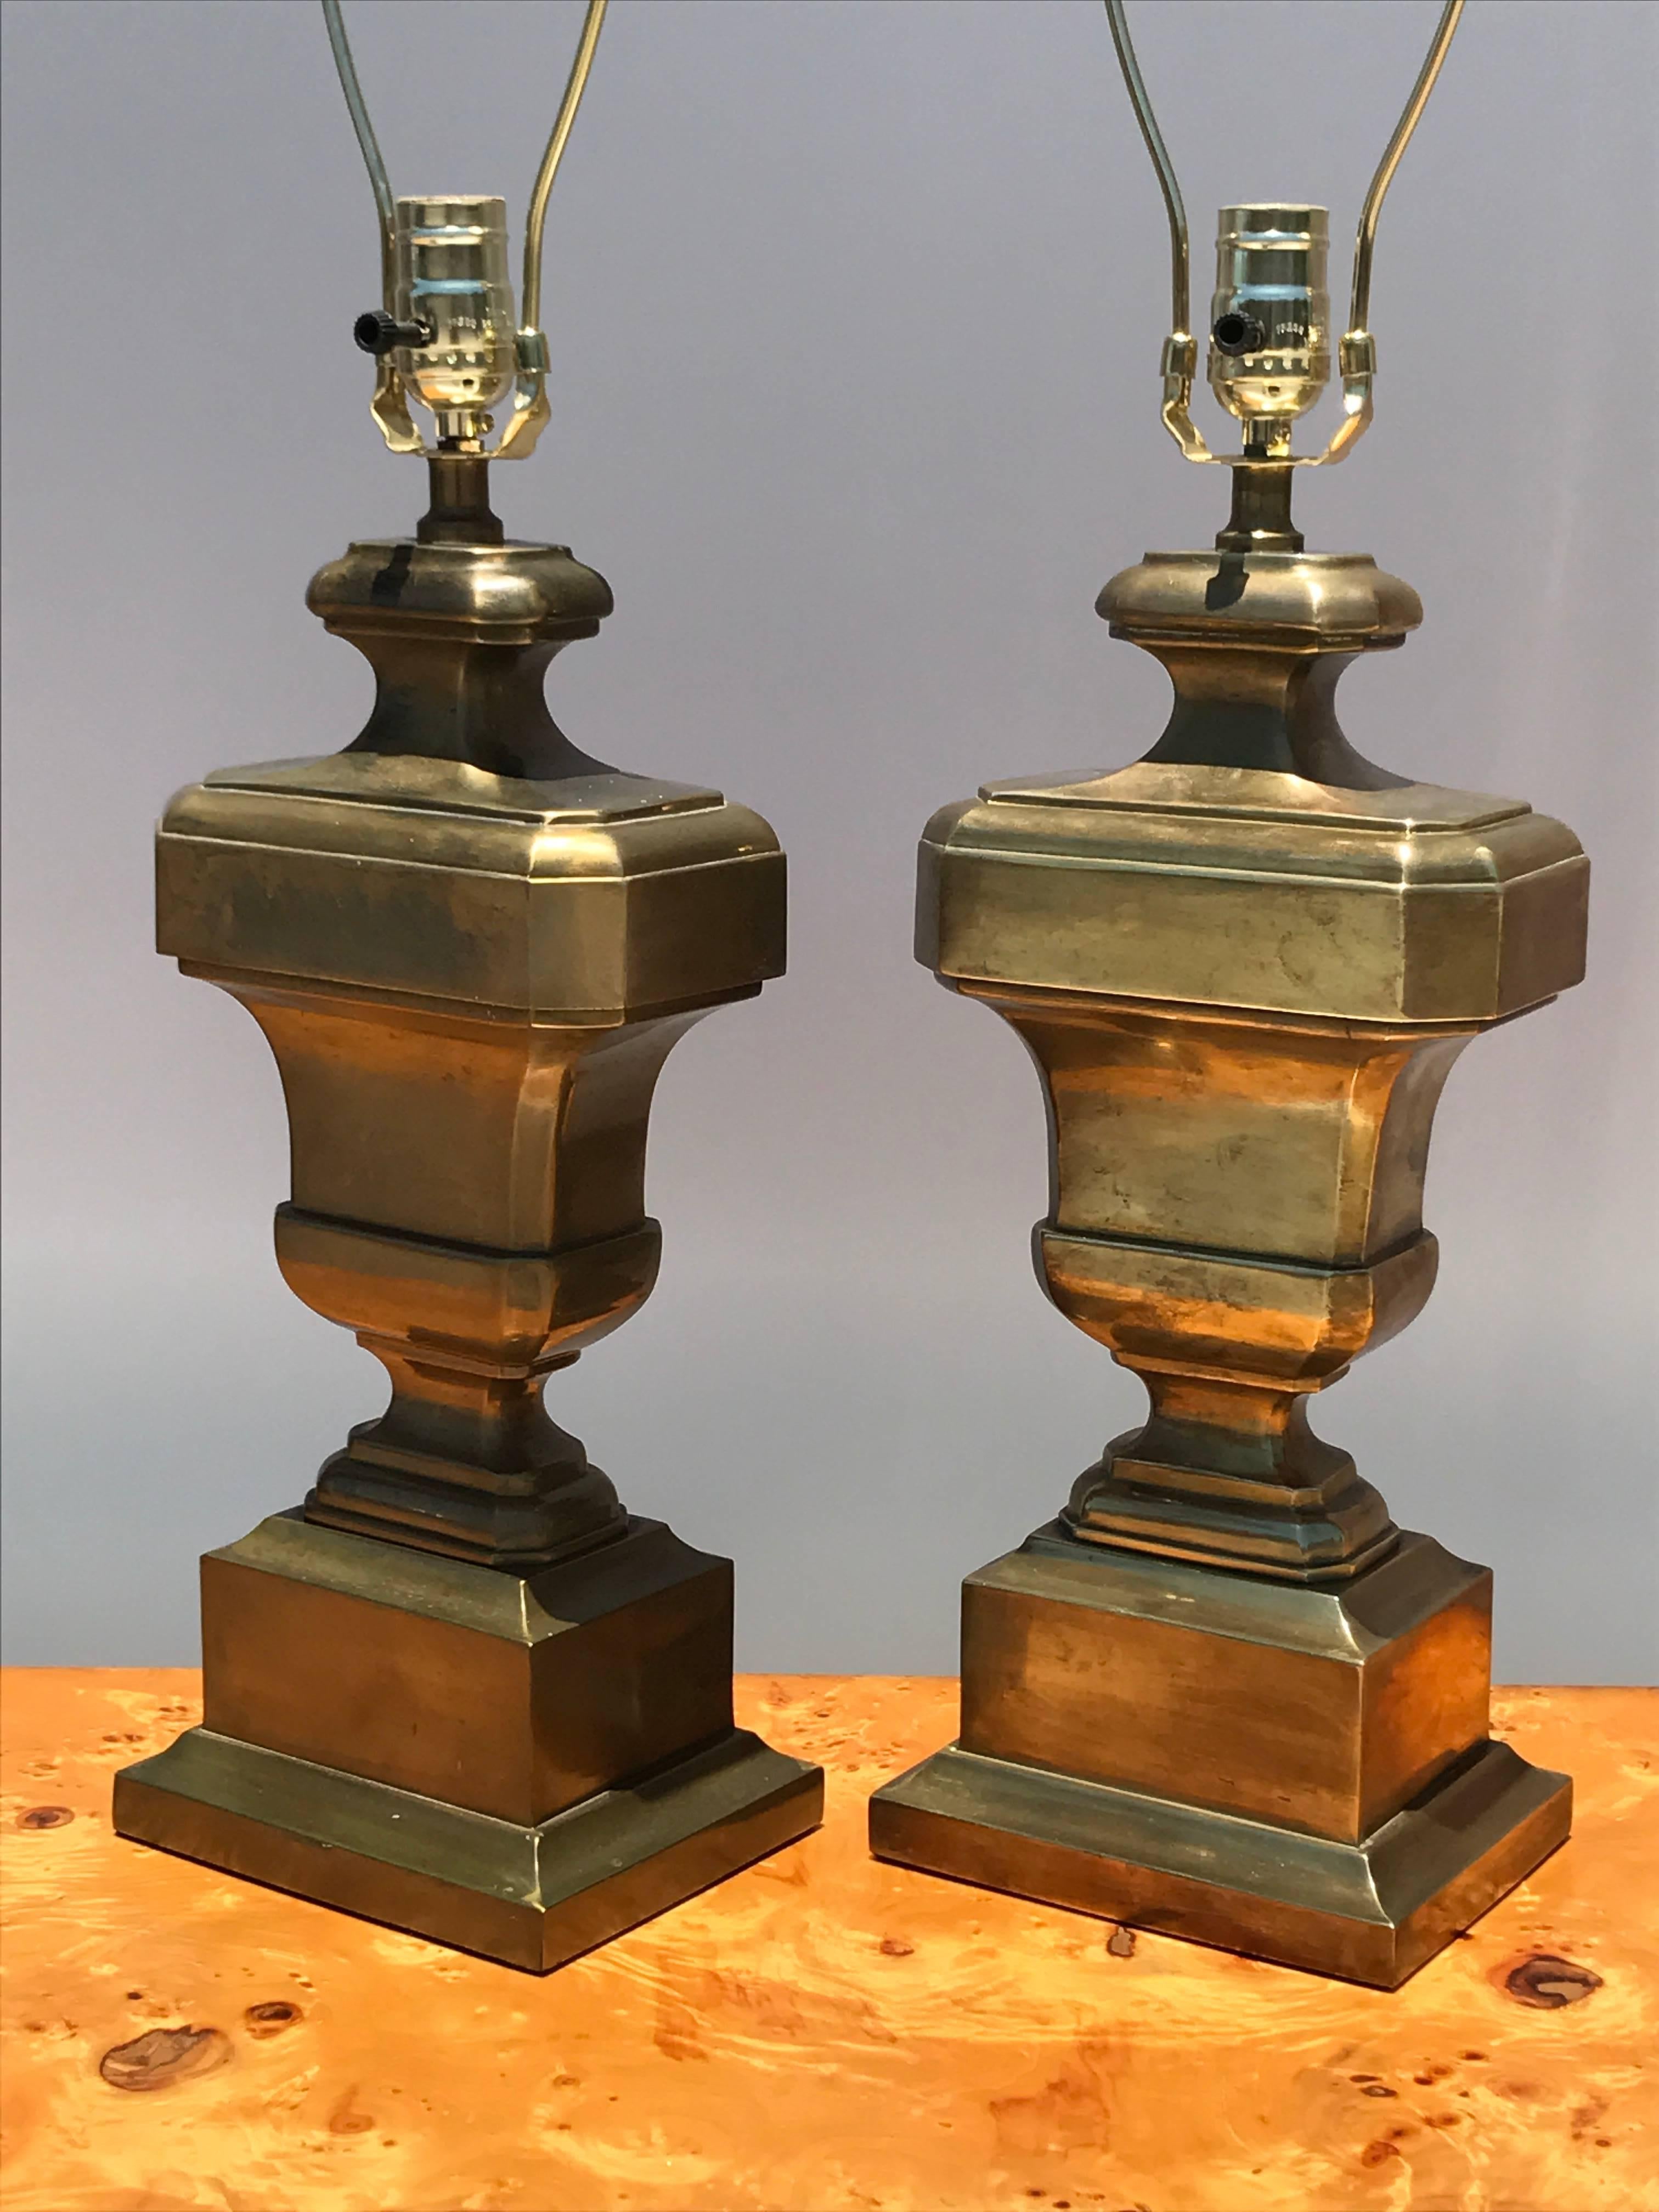 American Pair of Neoclassical Urn Patinated Brass Lamps